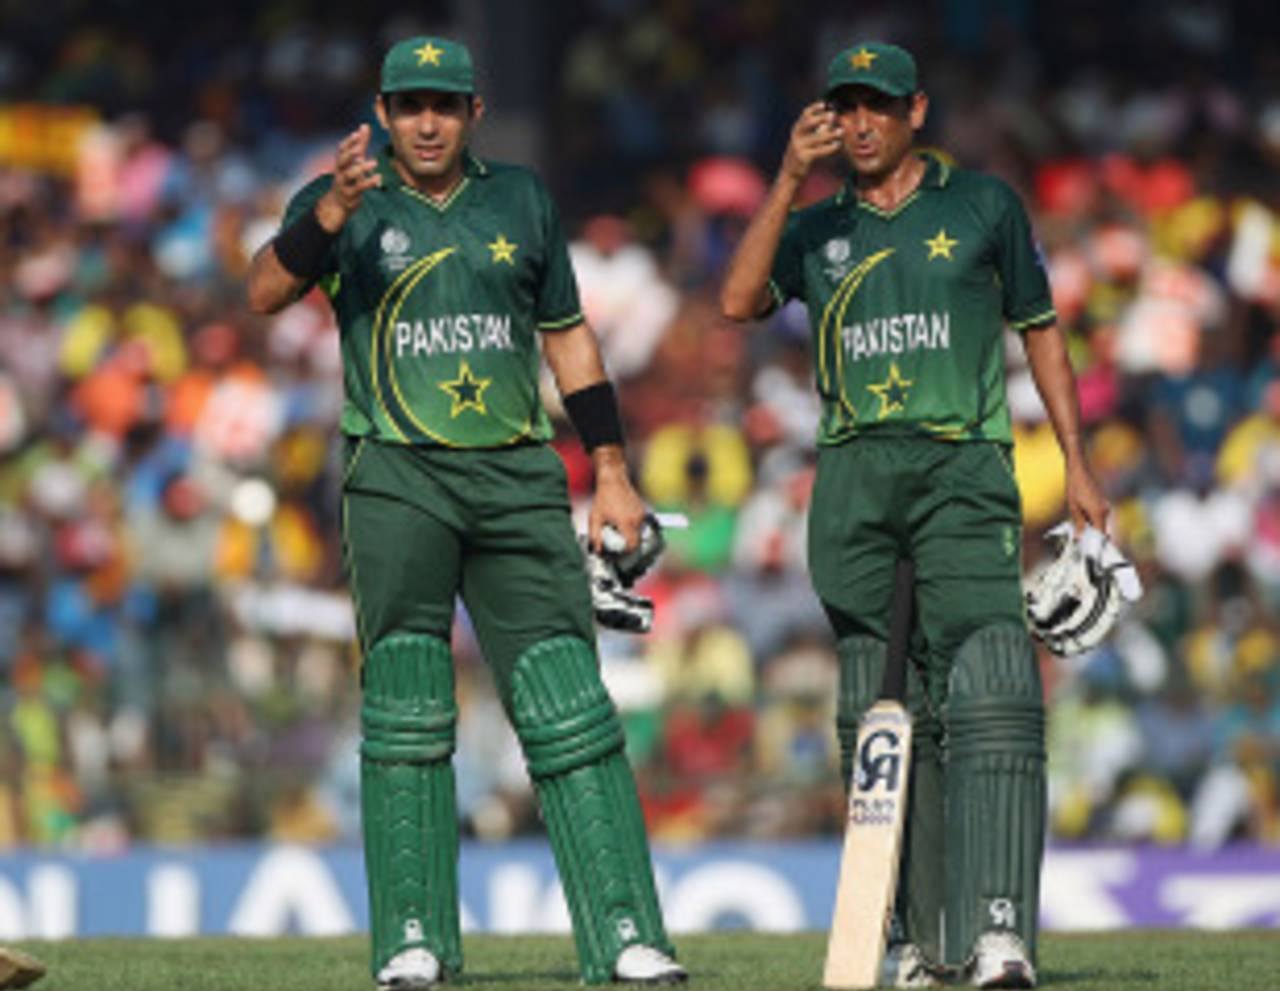 Misbah-ul-Haq and Younis Khan controlled Pakistan's innings superbly in the middle overs, Sri Lanka v Pakistan, World Cup, Group A, Colombo, February 26, 2011